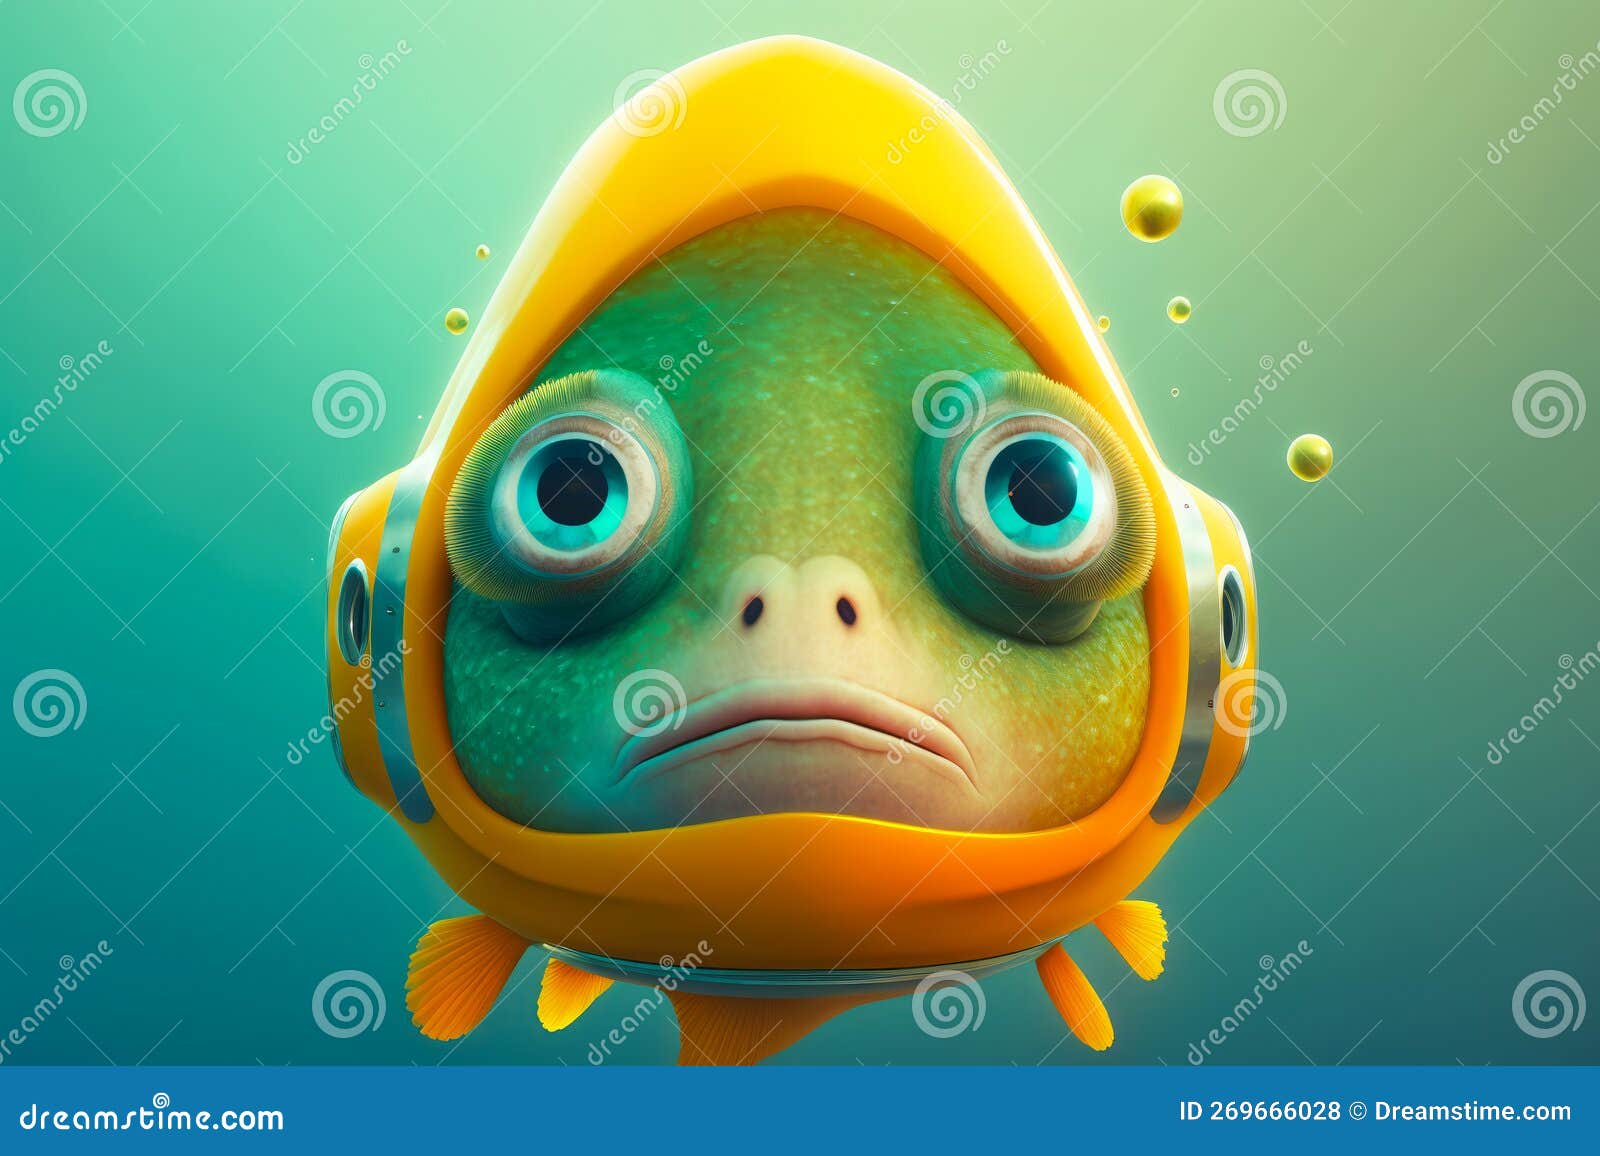 210 Cartoon Smiling Fish Stock Photos - Free & Royalty-Free Stock Photos  from Dreamstime